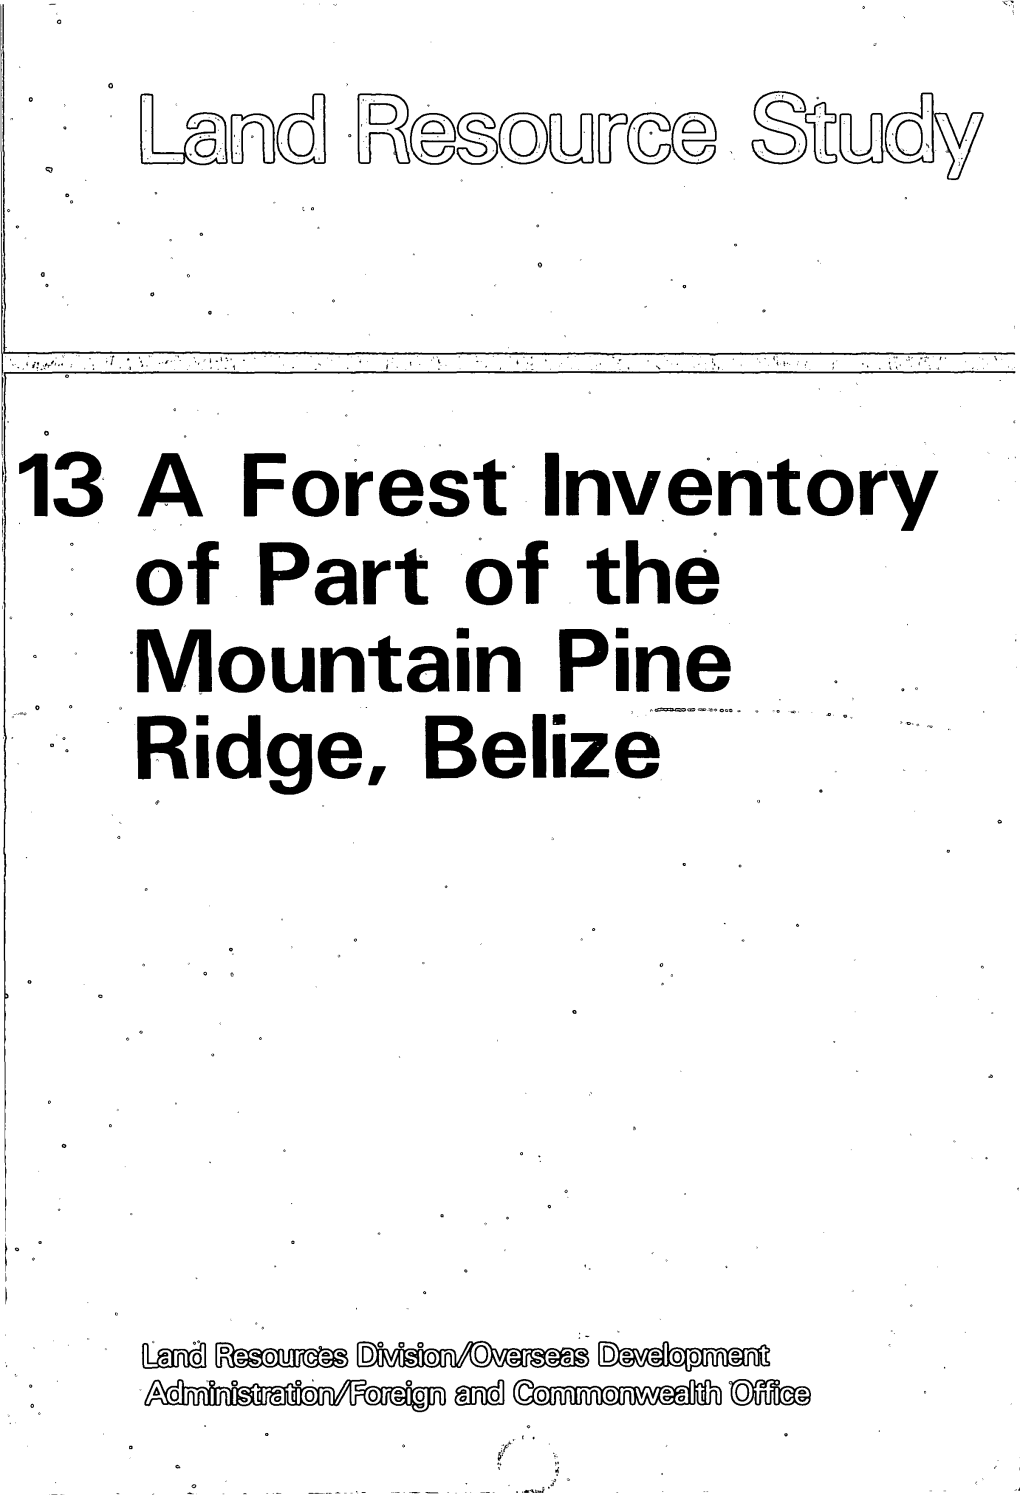 13 a Forest Inventory of Part of Thé Mountain Pine Ridge, Belize